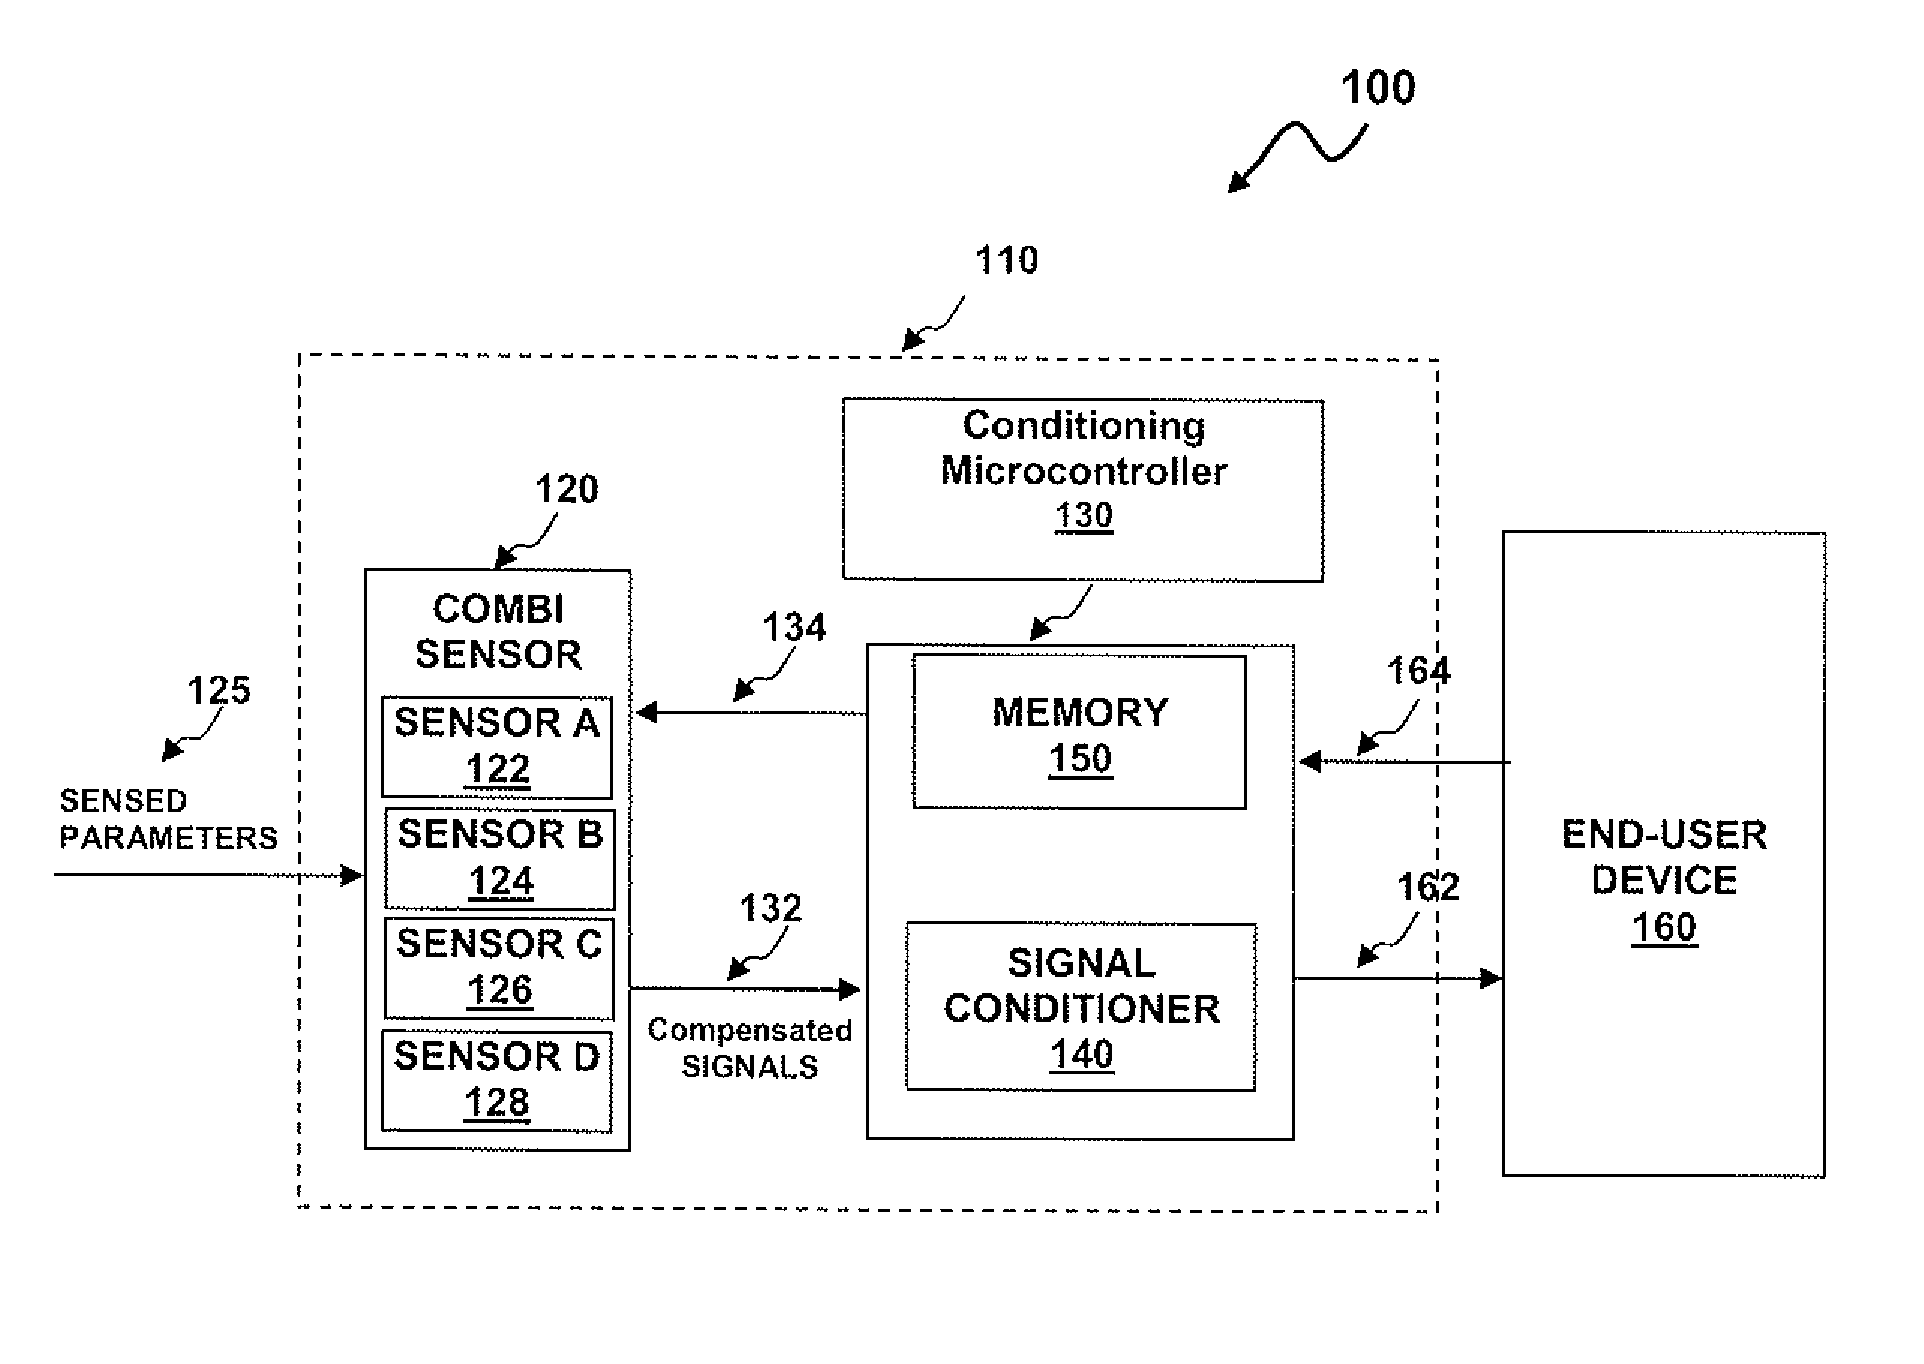 Multi-gas flow sensor with gas specific calibration capability